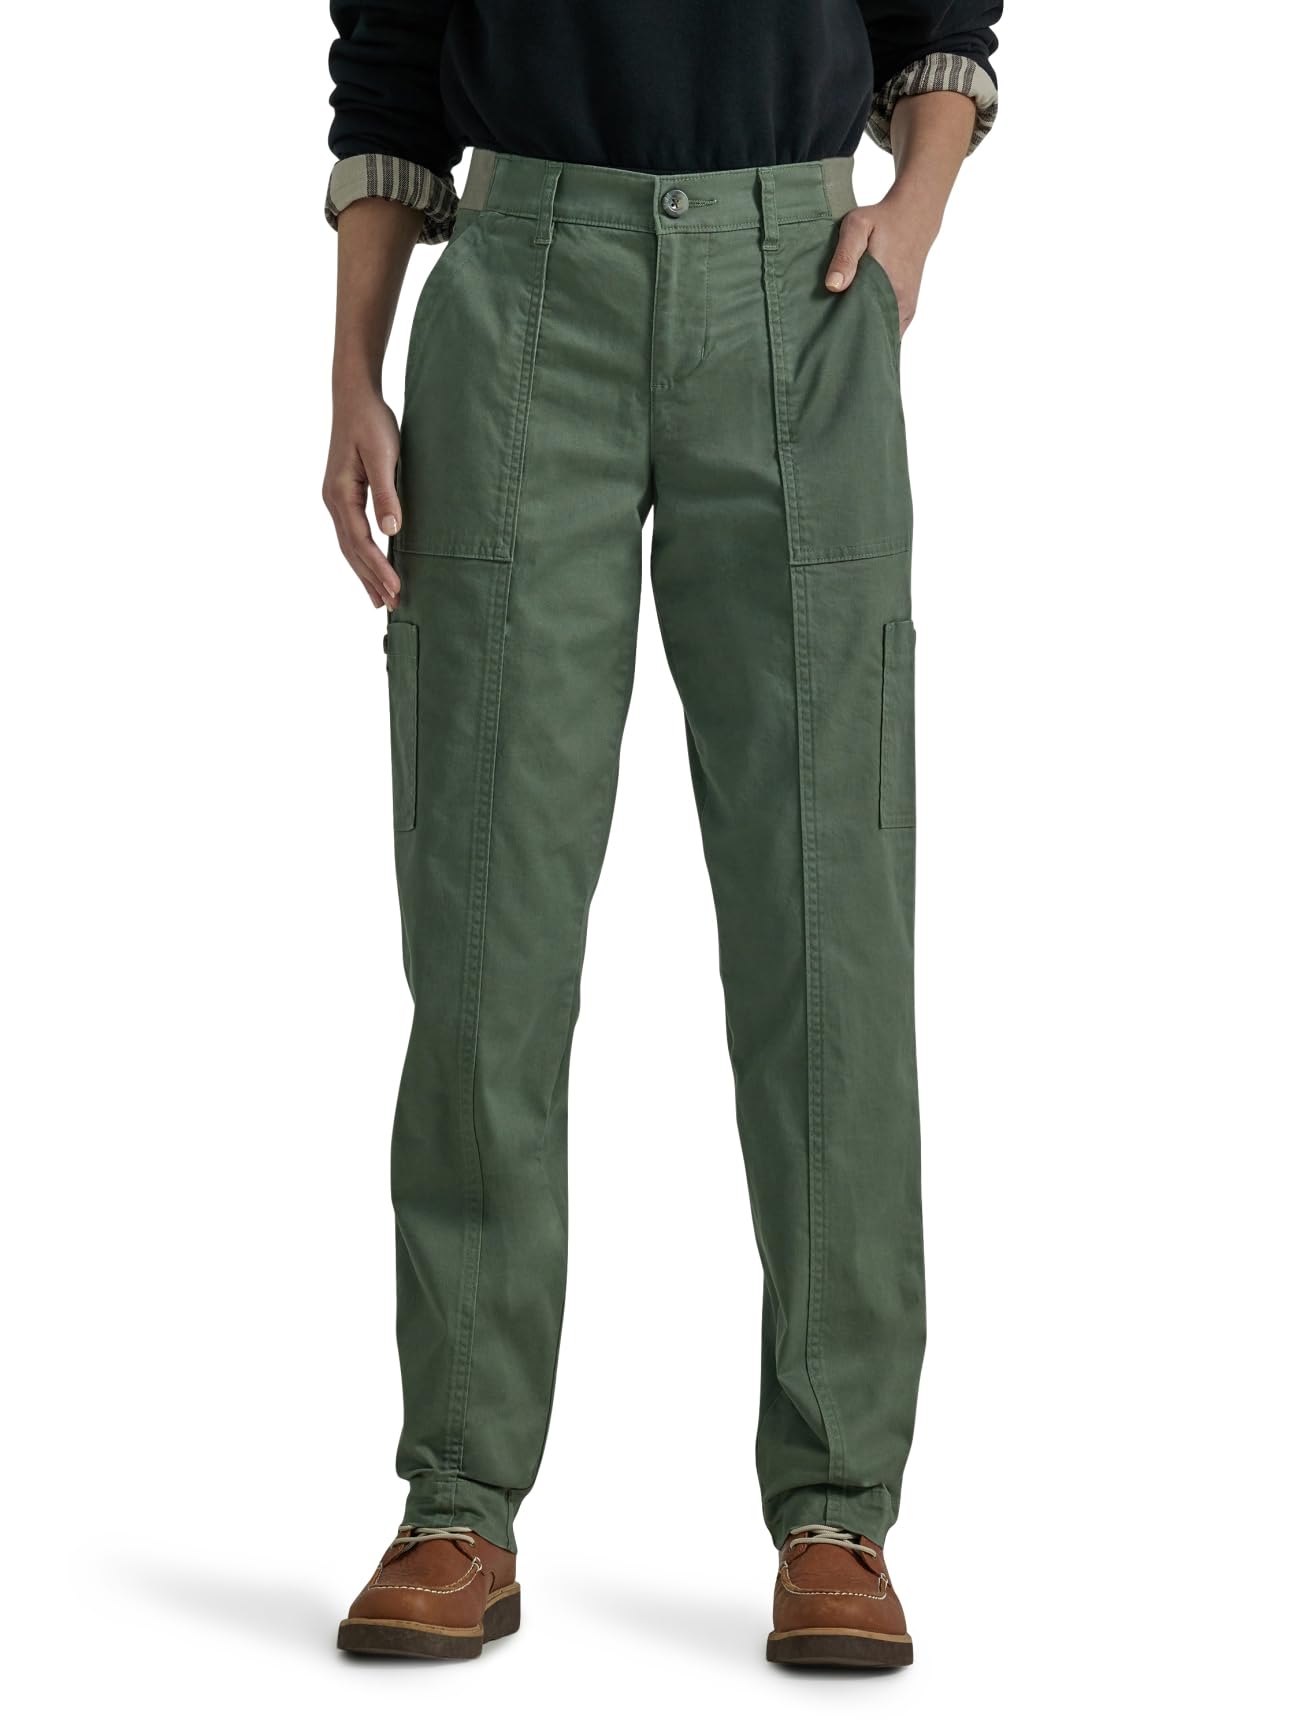 Lee Women's Petite Ultra Lux Comfort with Flex-to-go Utility Pant